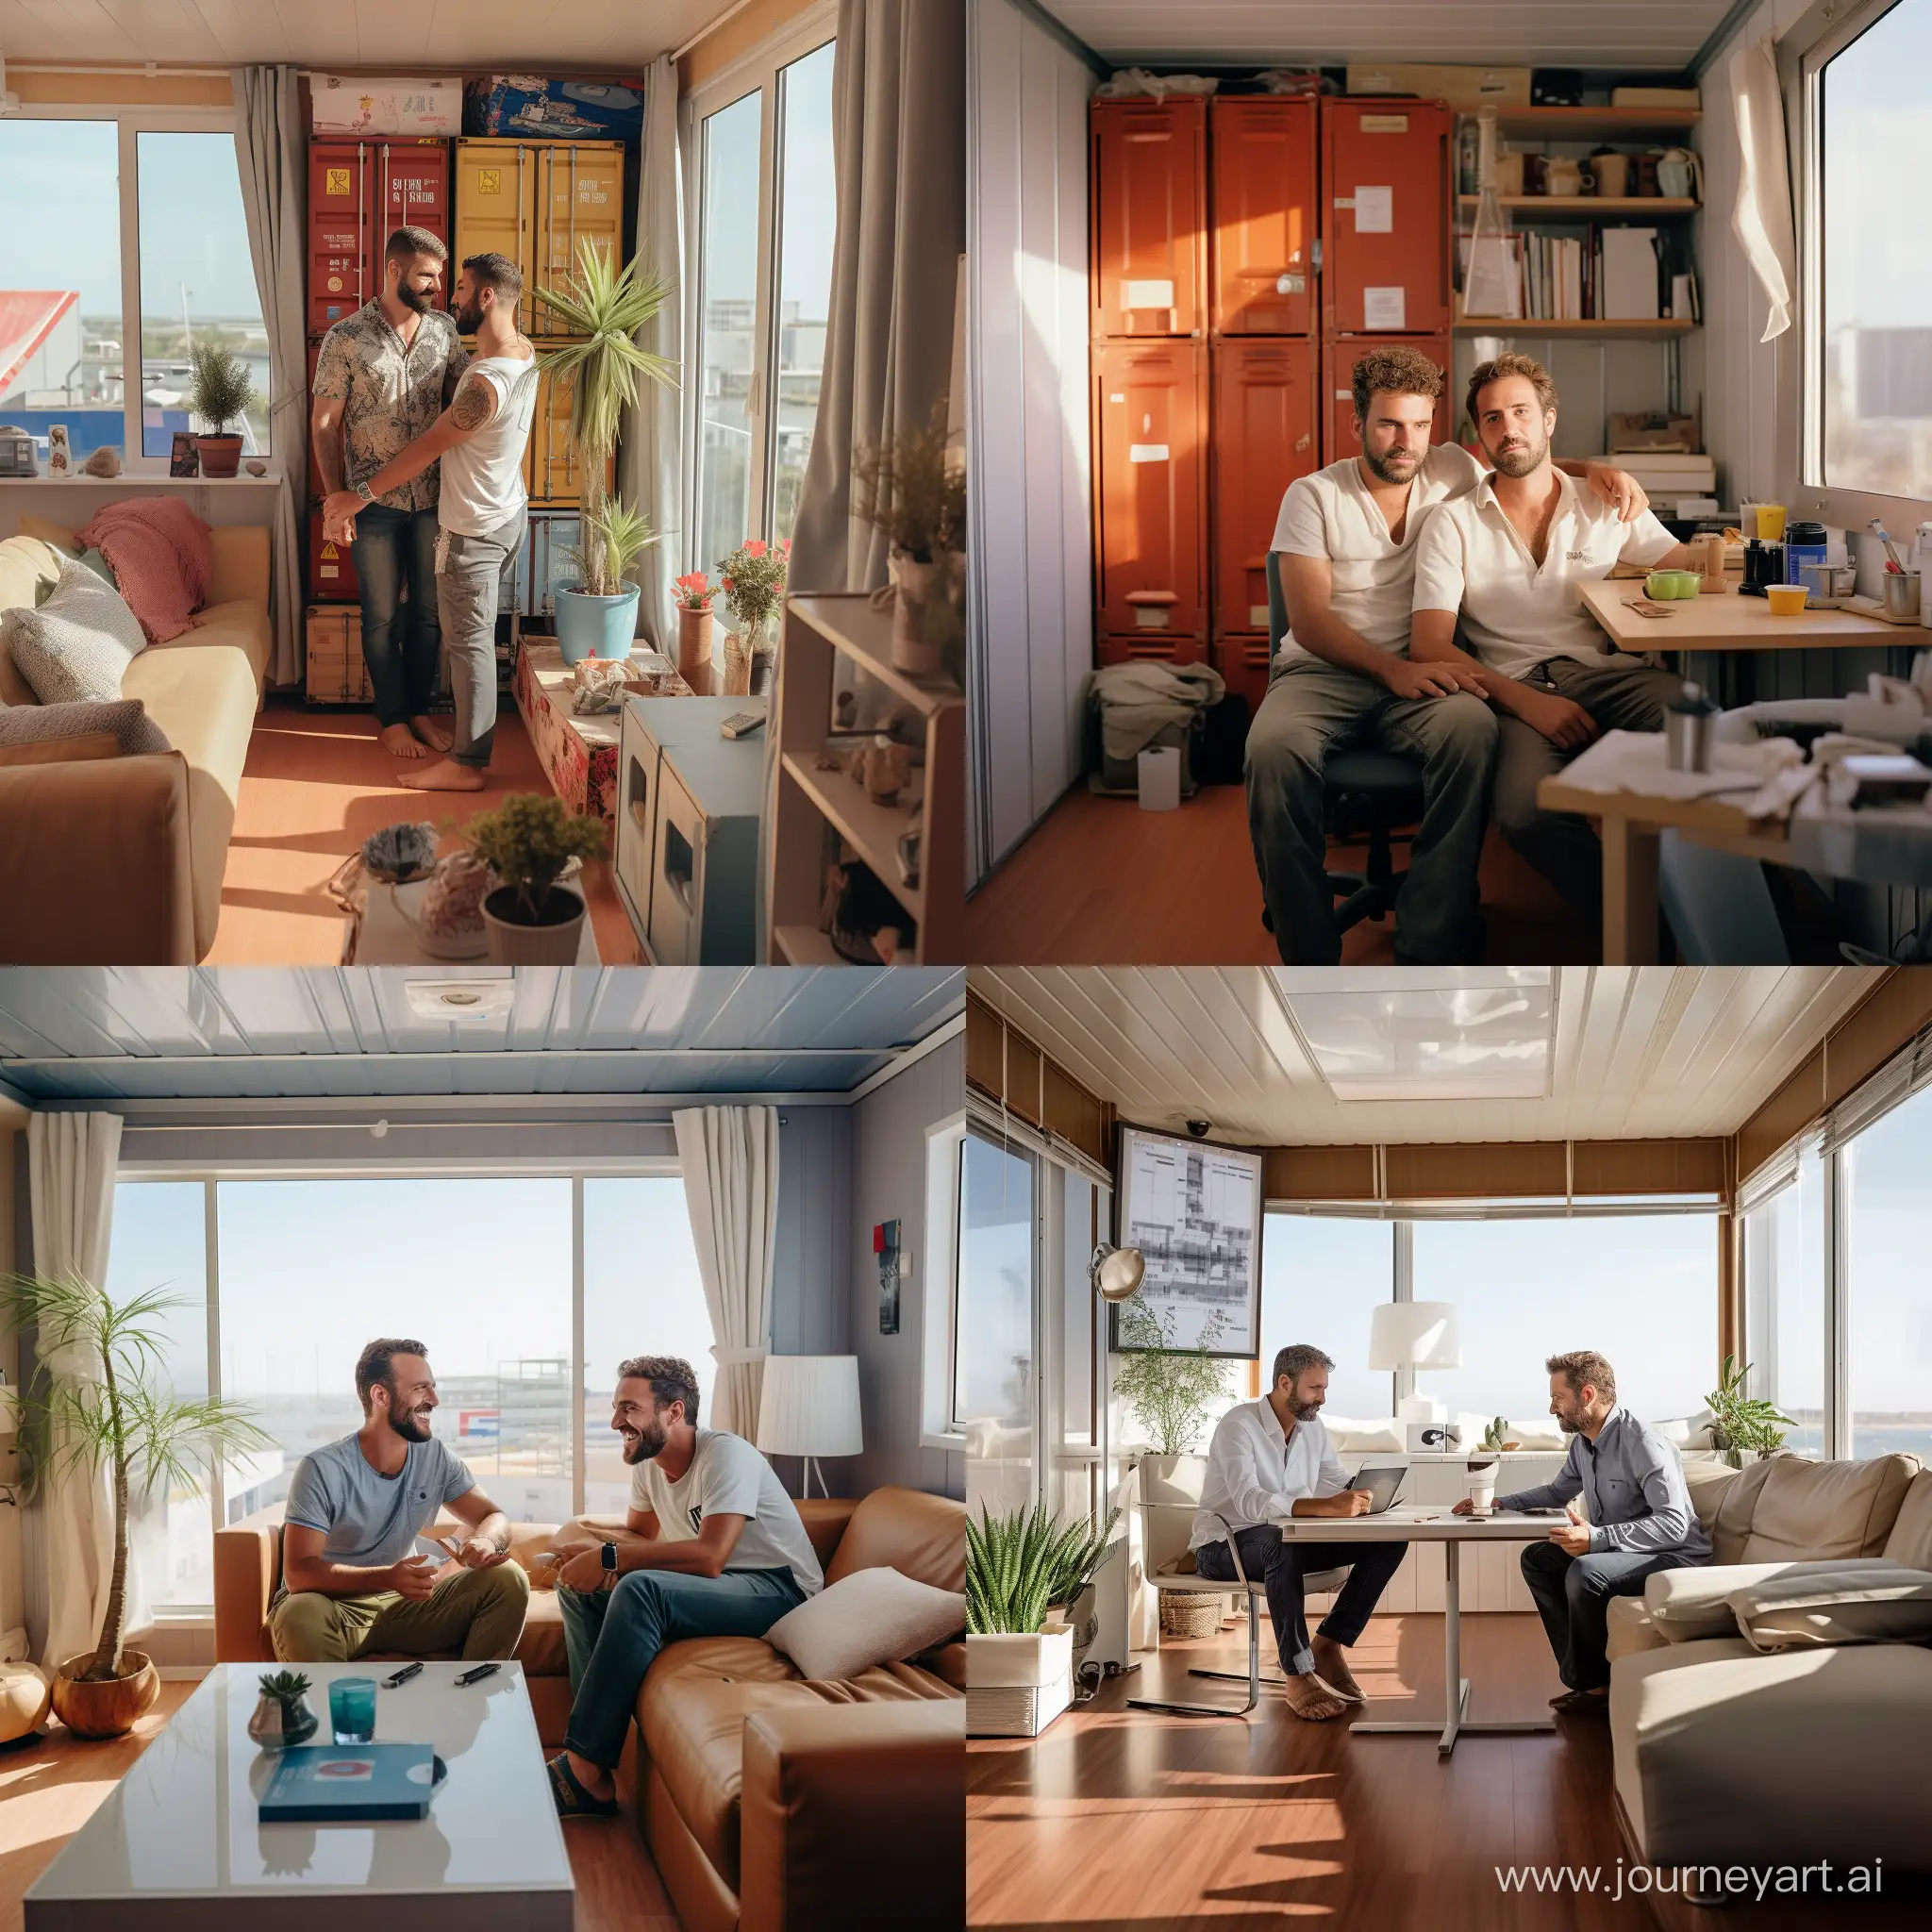 Portuguese environmentalist and gay couple in the office of modern shipping container home